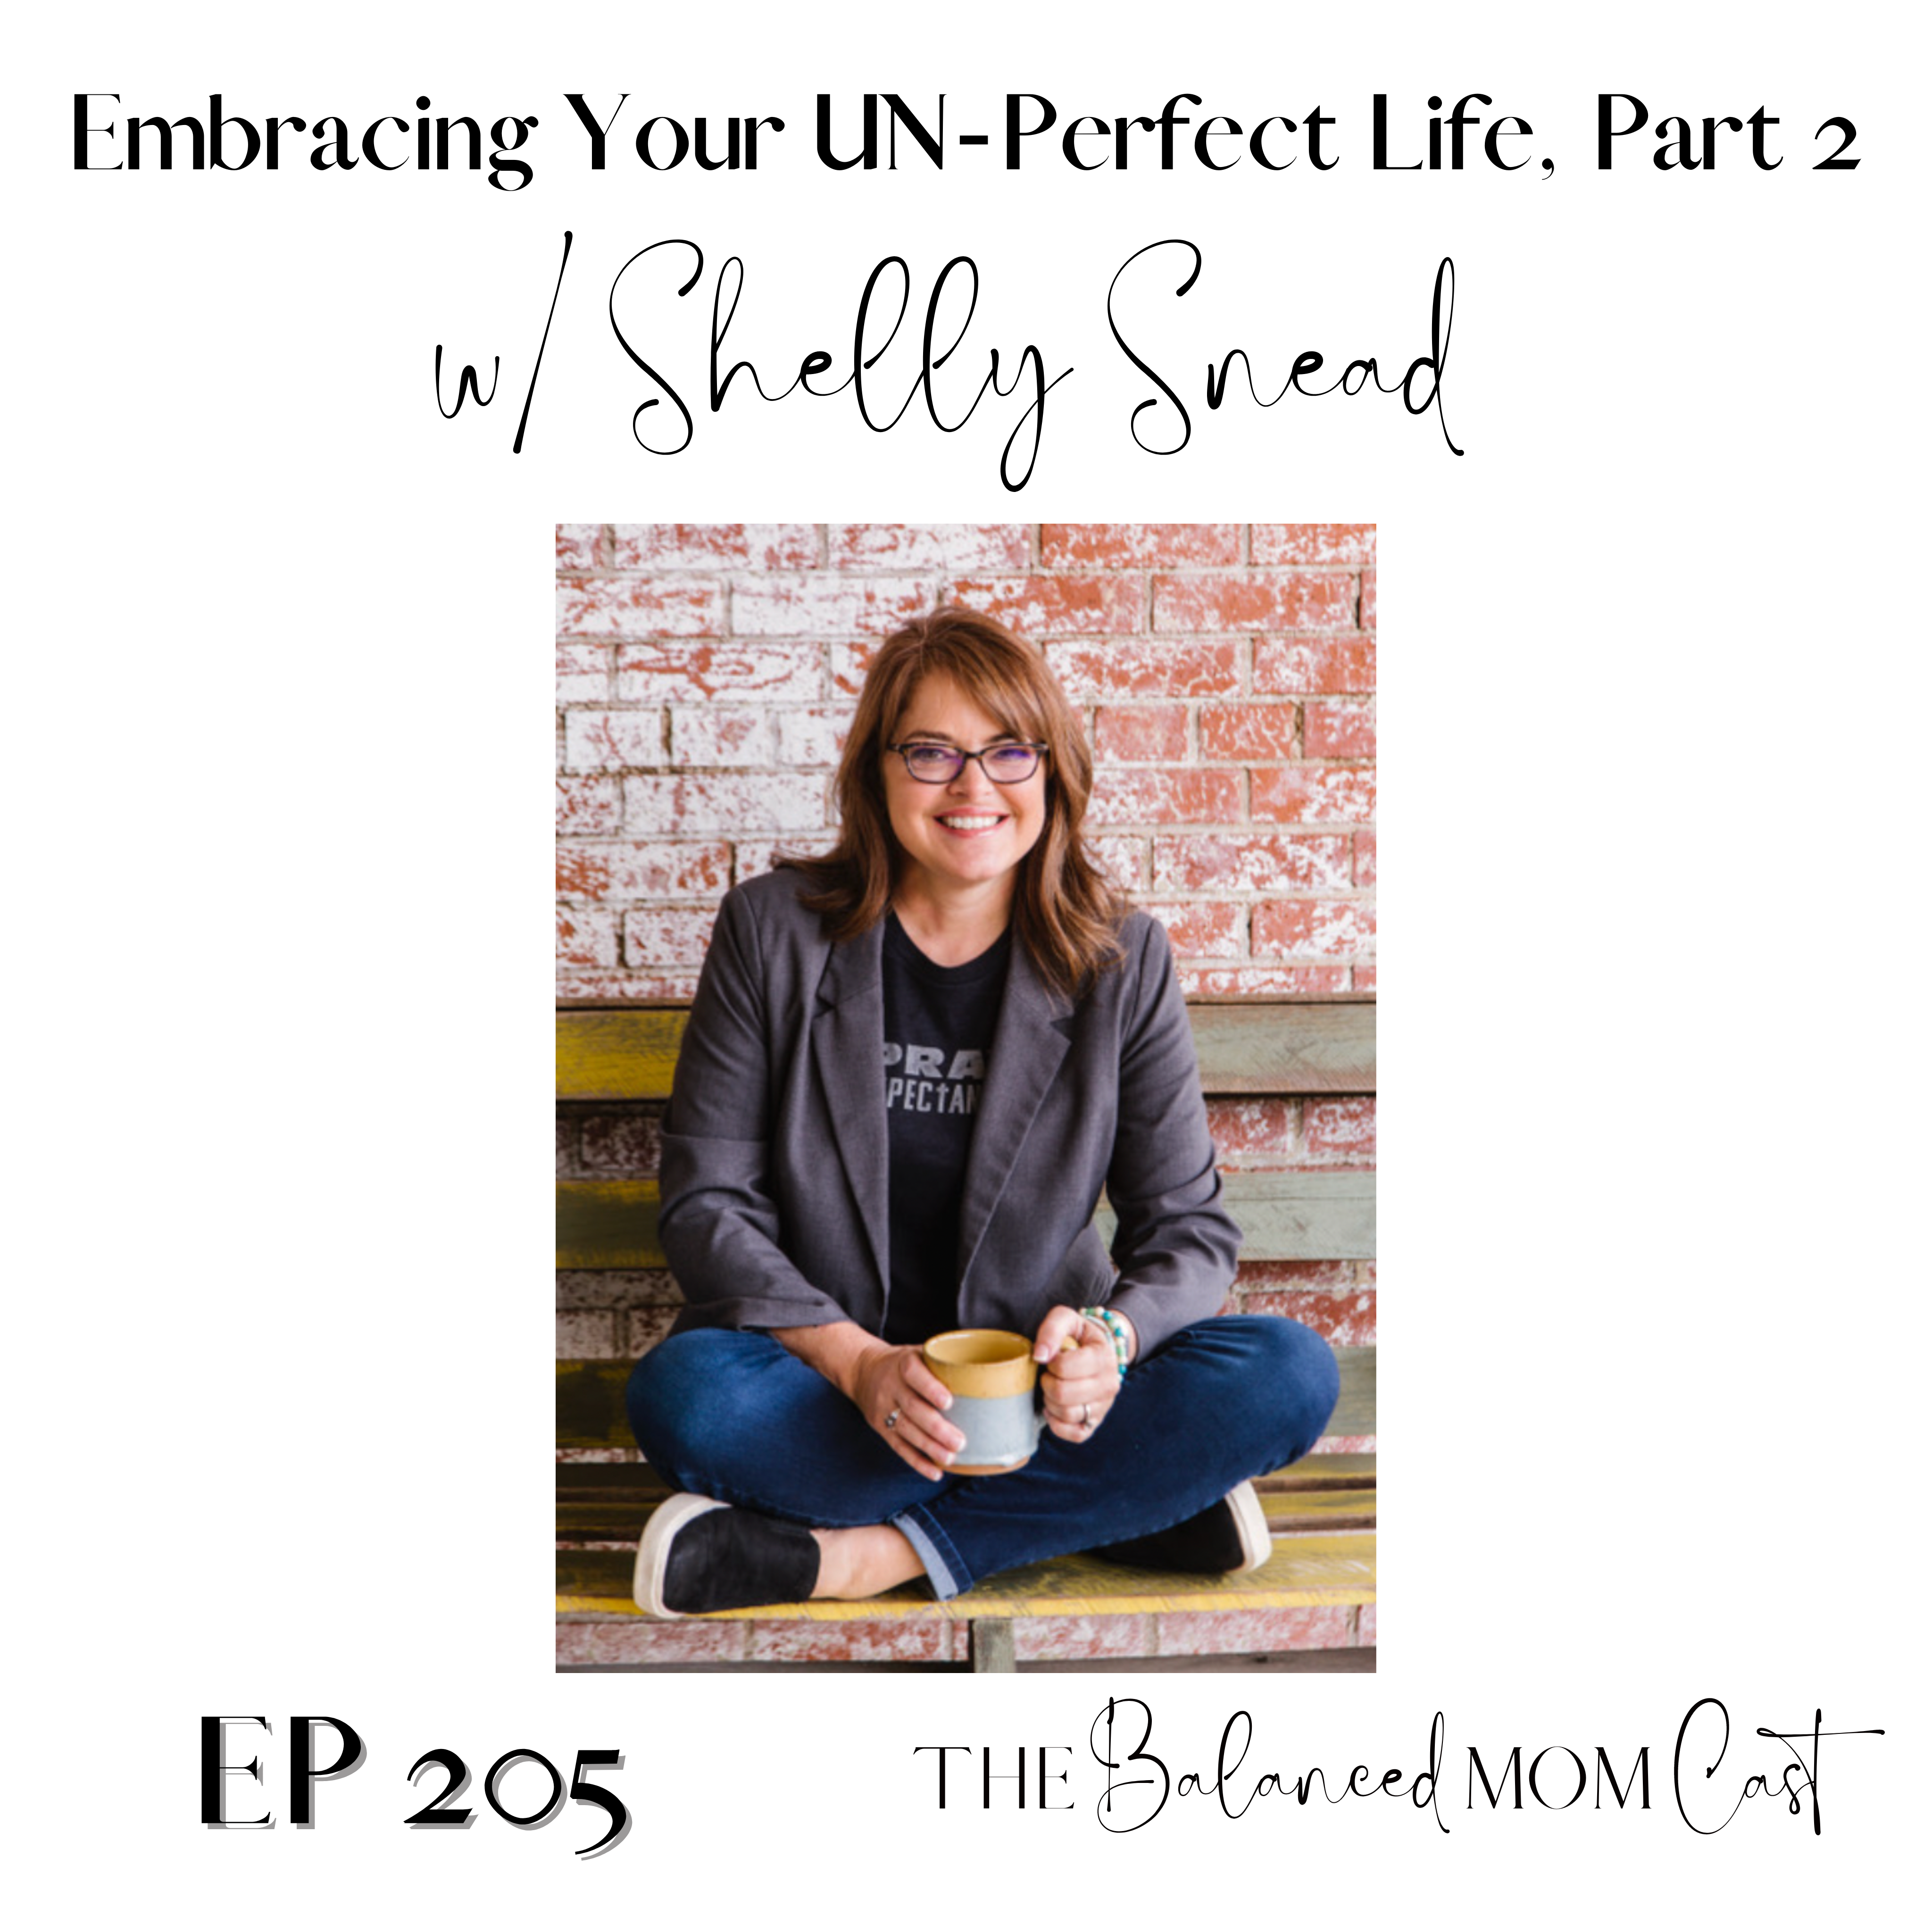 Ep 205: Embracing Your UN-Perfect Life, w/Shelly Snead (Pt.2)